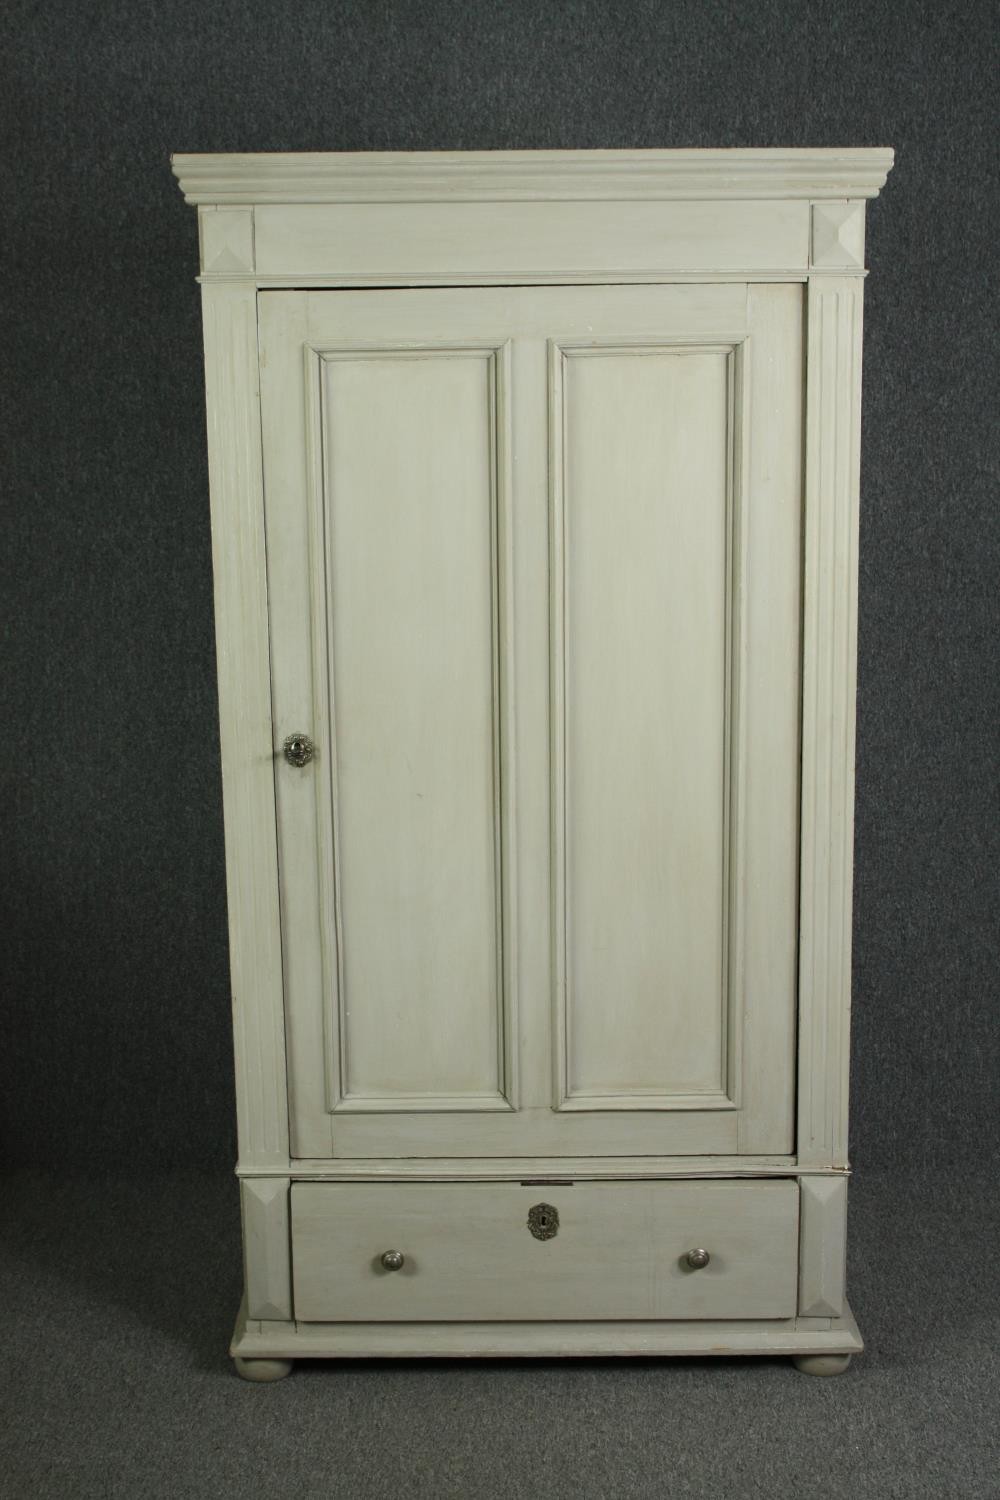 Hall cupboard, 19th century painted Continental. H.182 W.92 D.50cm. (Small repair needed as seen